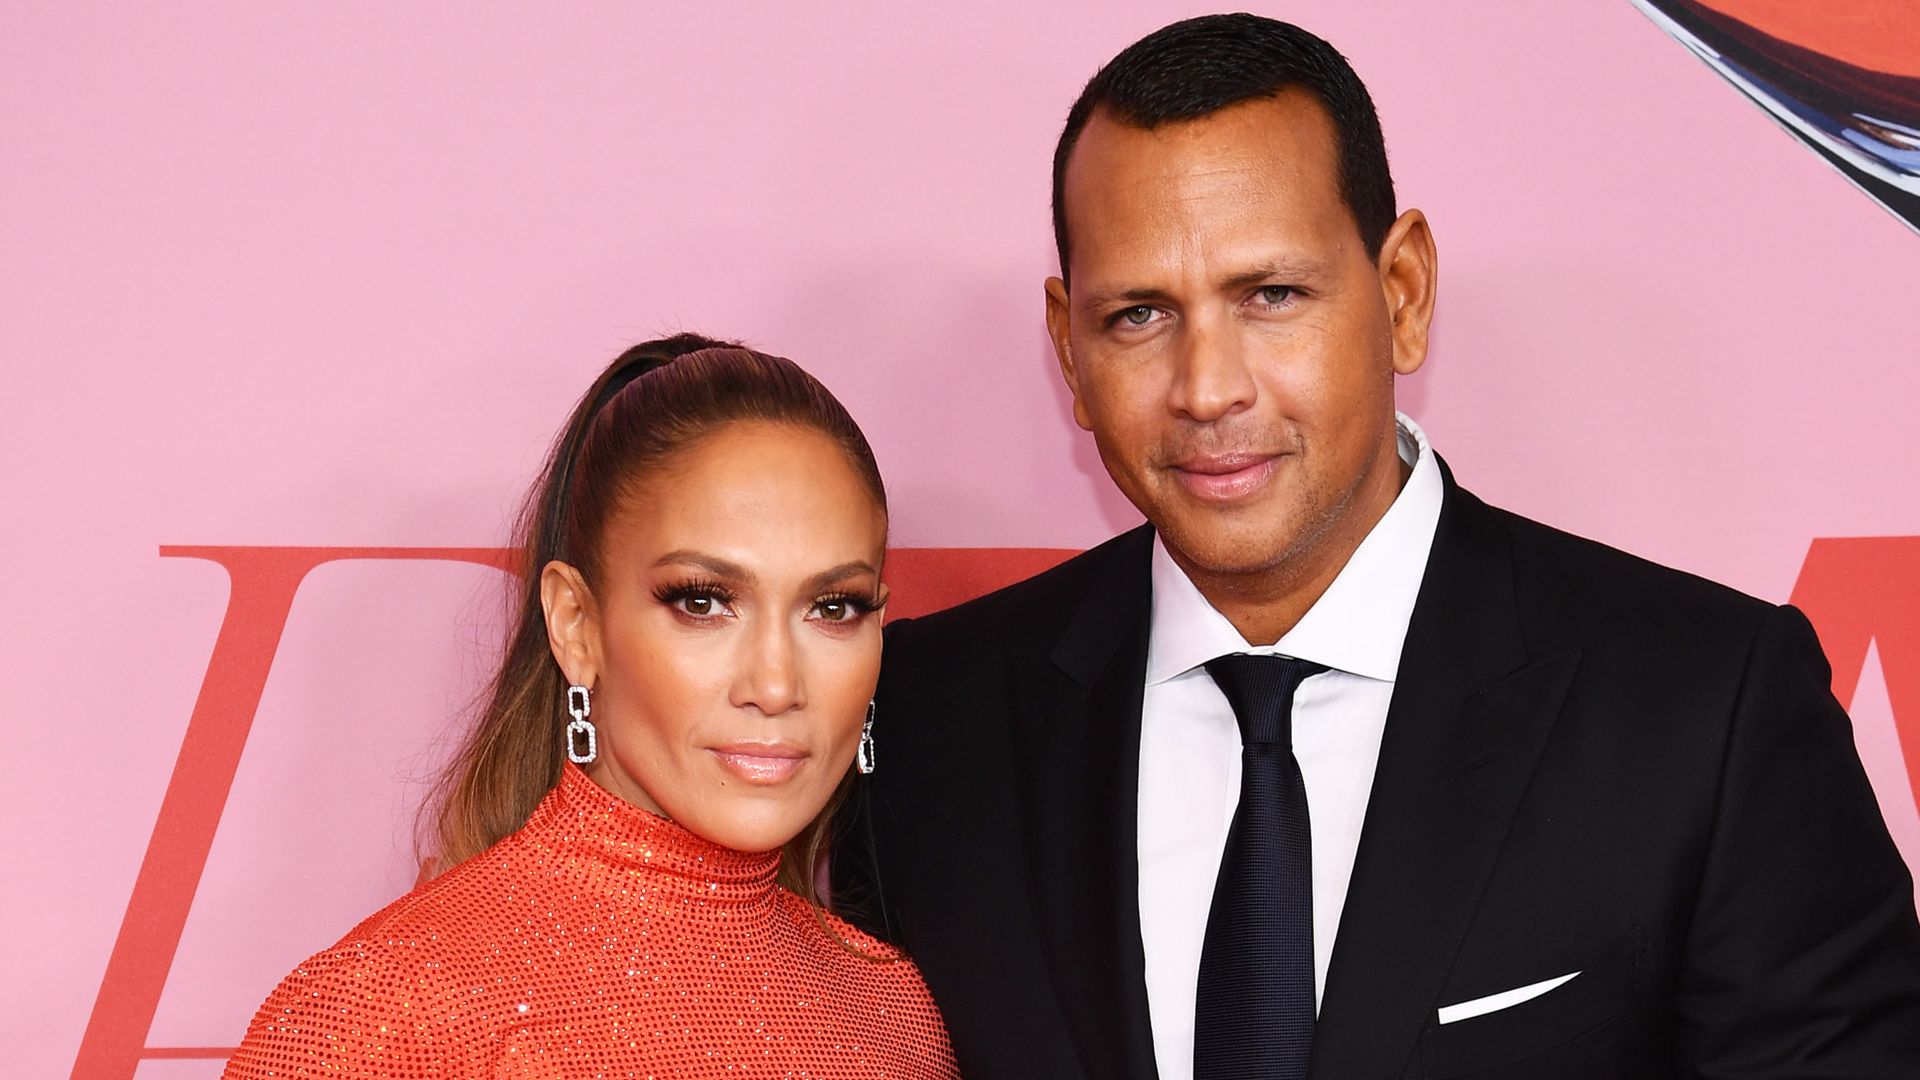 Jennifer Lopez poses with the Fashion Icon Award and Alex Rodriguez during Winners Walk during the CFDA Fashion Awards at the Brooklyn Museum of Art on June 03, 2019 in New York City.